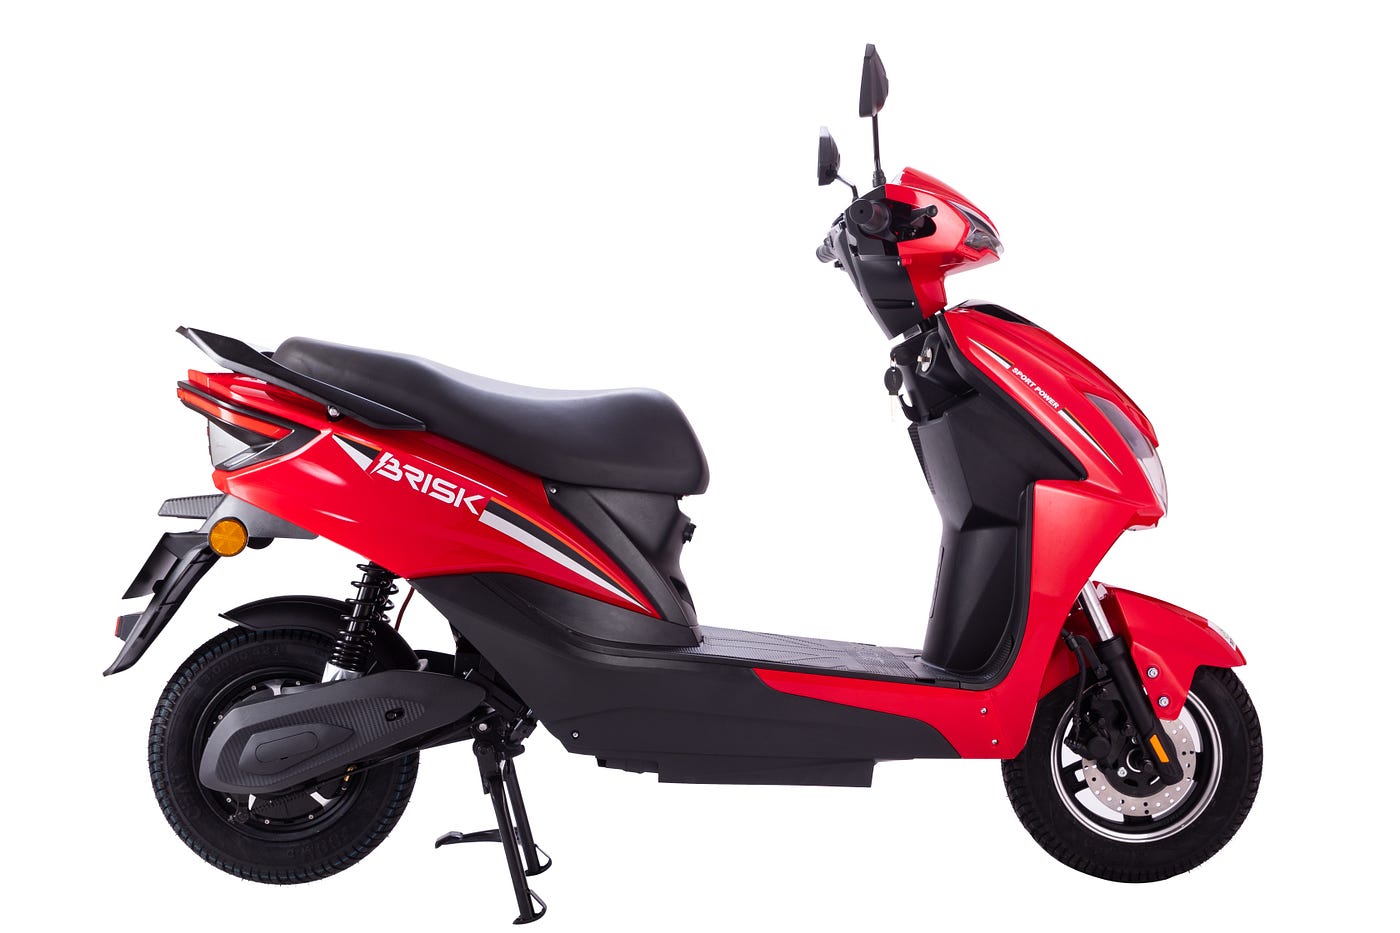 What Are Latest 5 Electric Scooters In India?